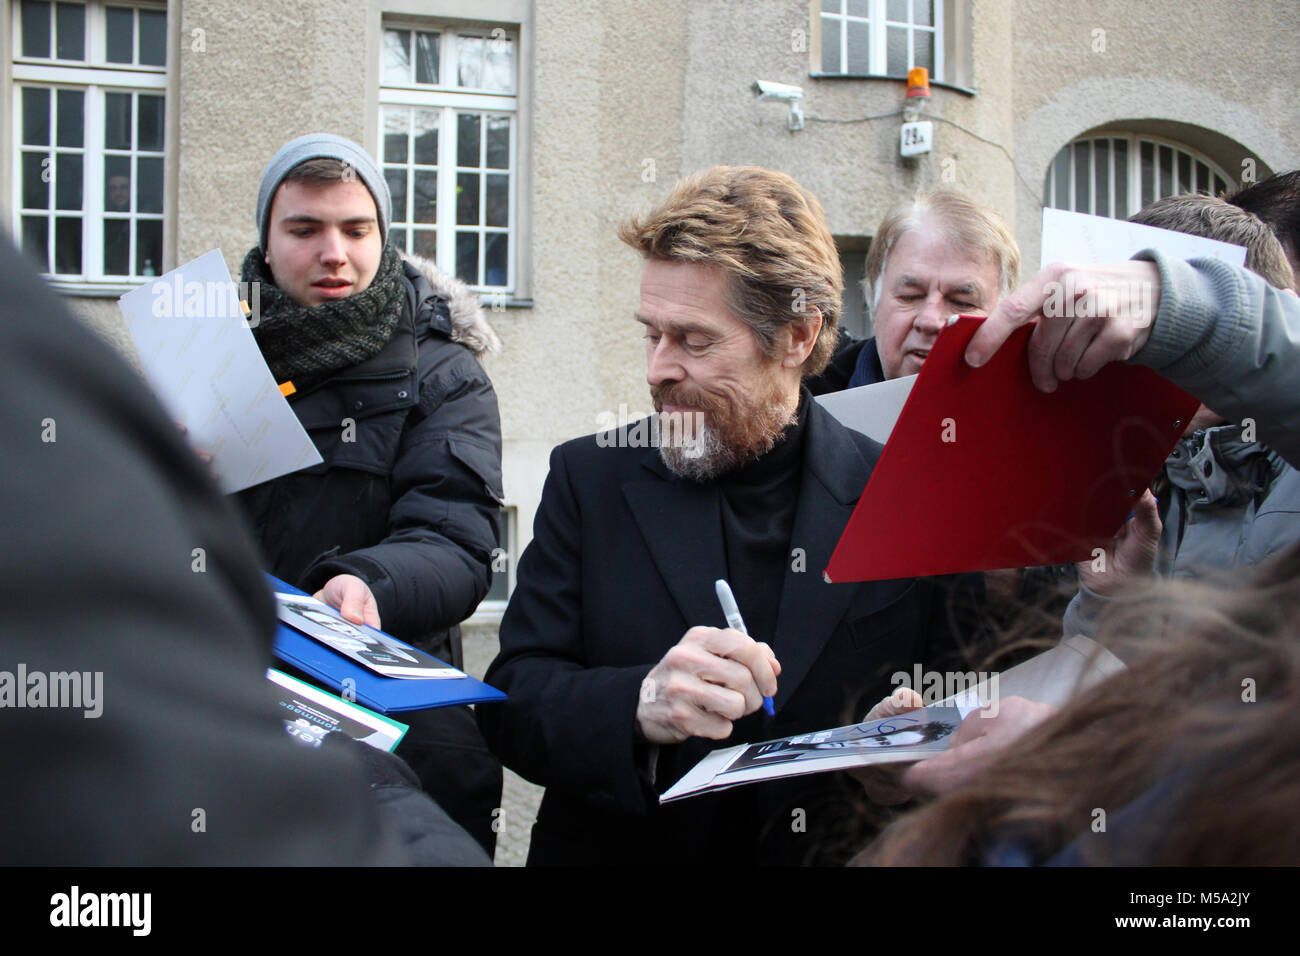 Berlin, Germany. 21st February, 2018. Willem Defoe gives autographs to his fans. 68th BERLINALE, Where: Berlin/Germany, When:, Featuring: Willem Dafoe, When: 20th February 2018, “Credits: T.O.Pictures / Alamy Live News“ Stock Photo